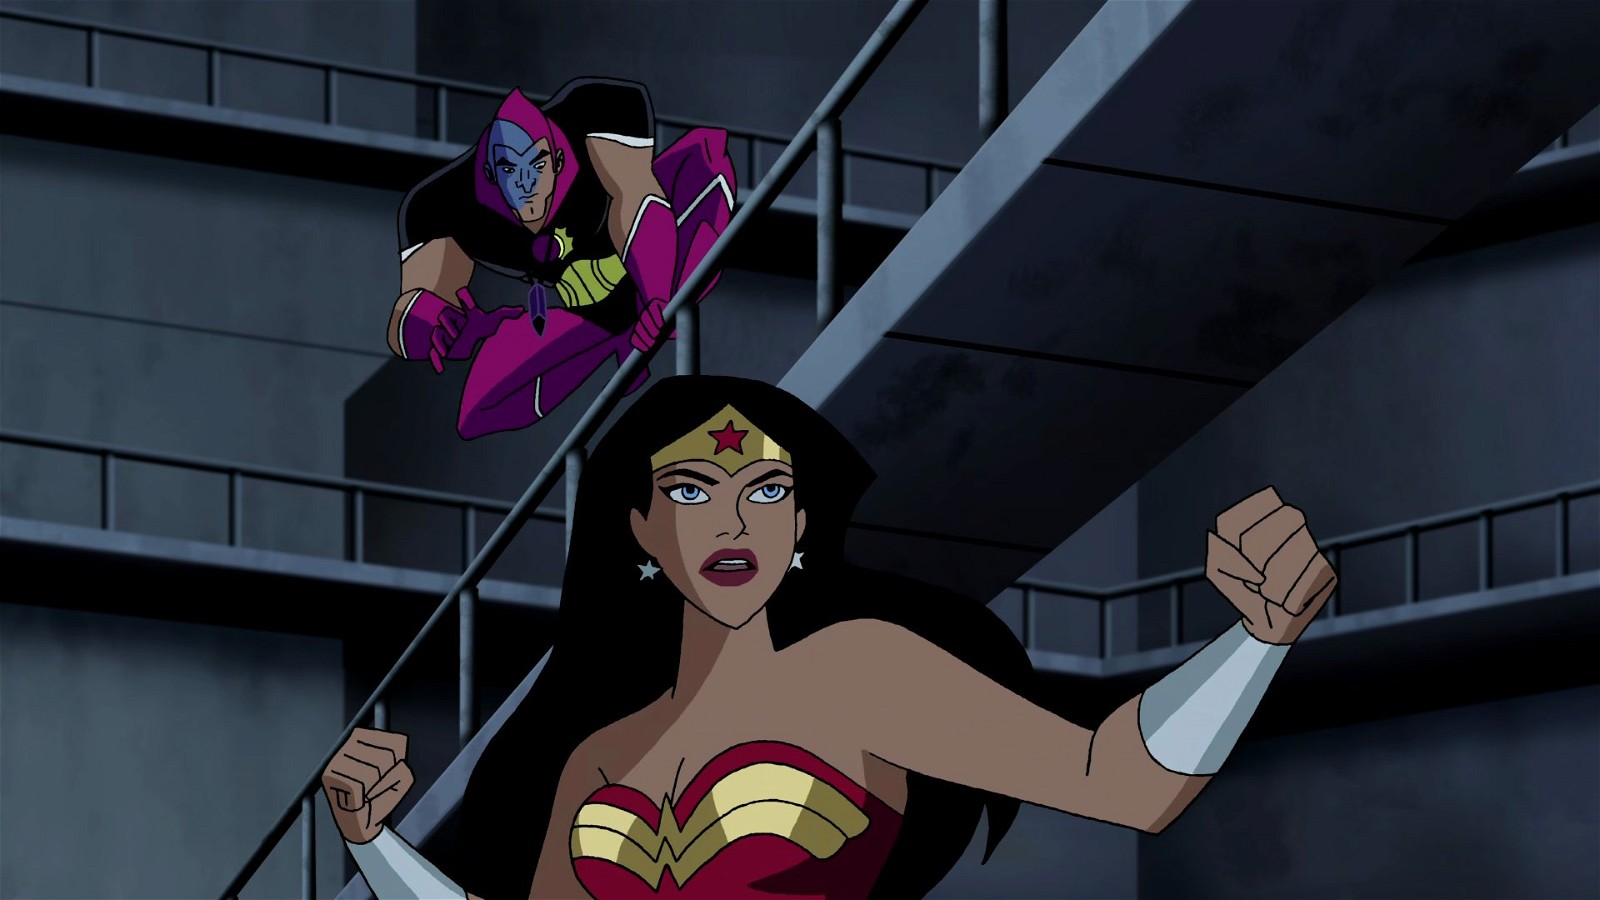 Eclipso fighting Wonder Woman, Justice League Unlimited